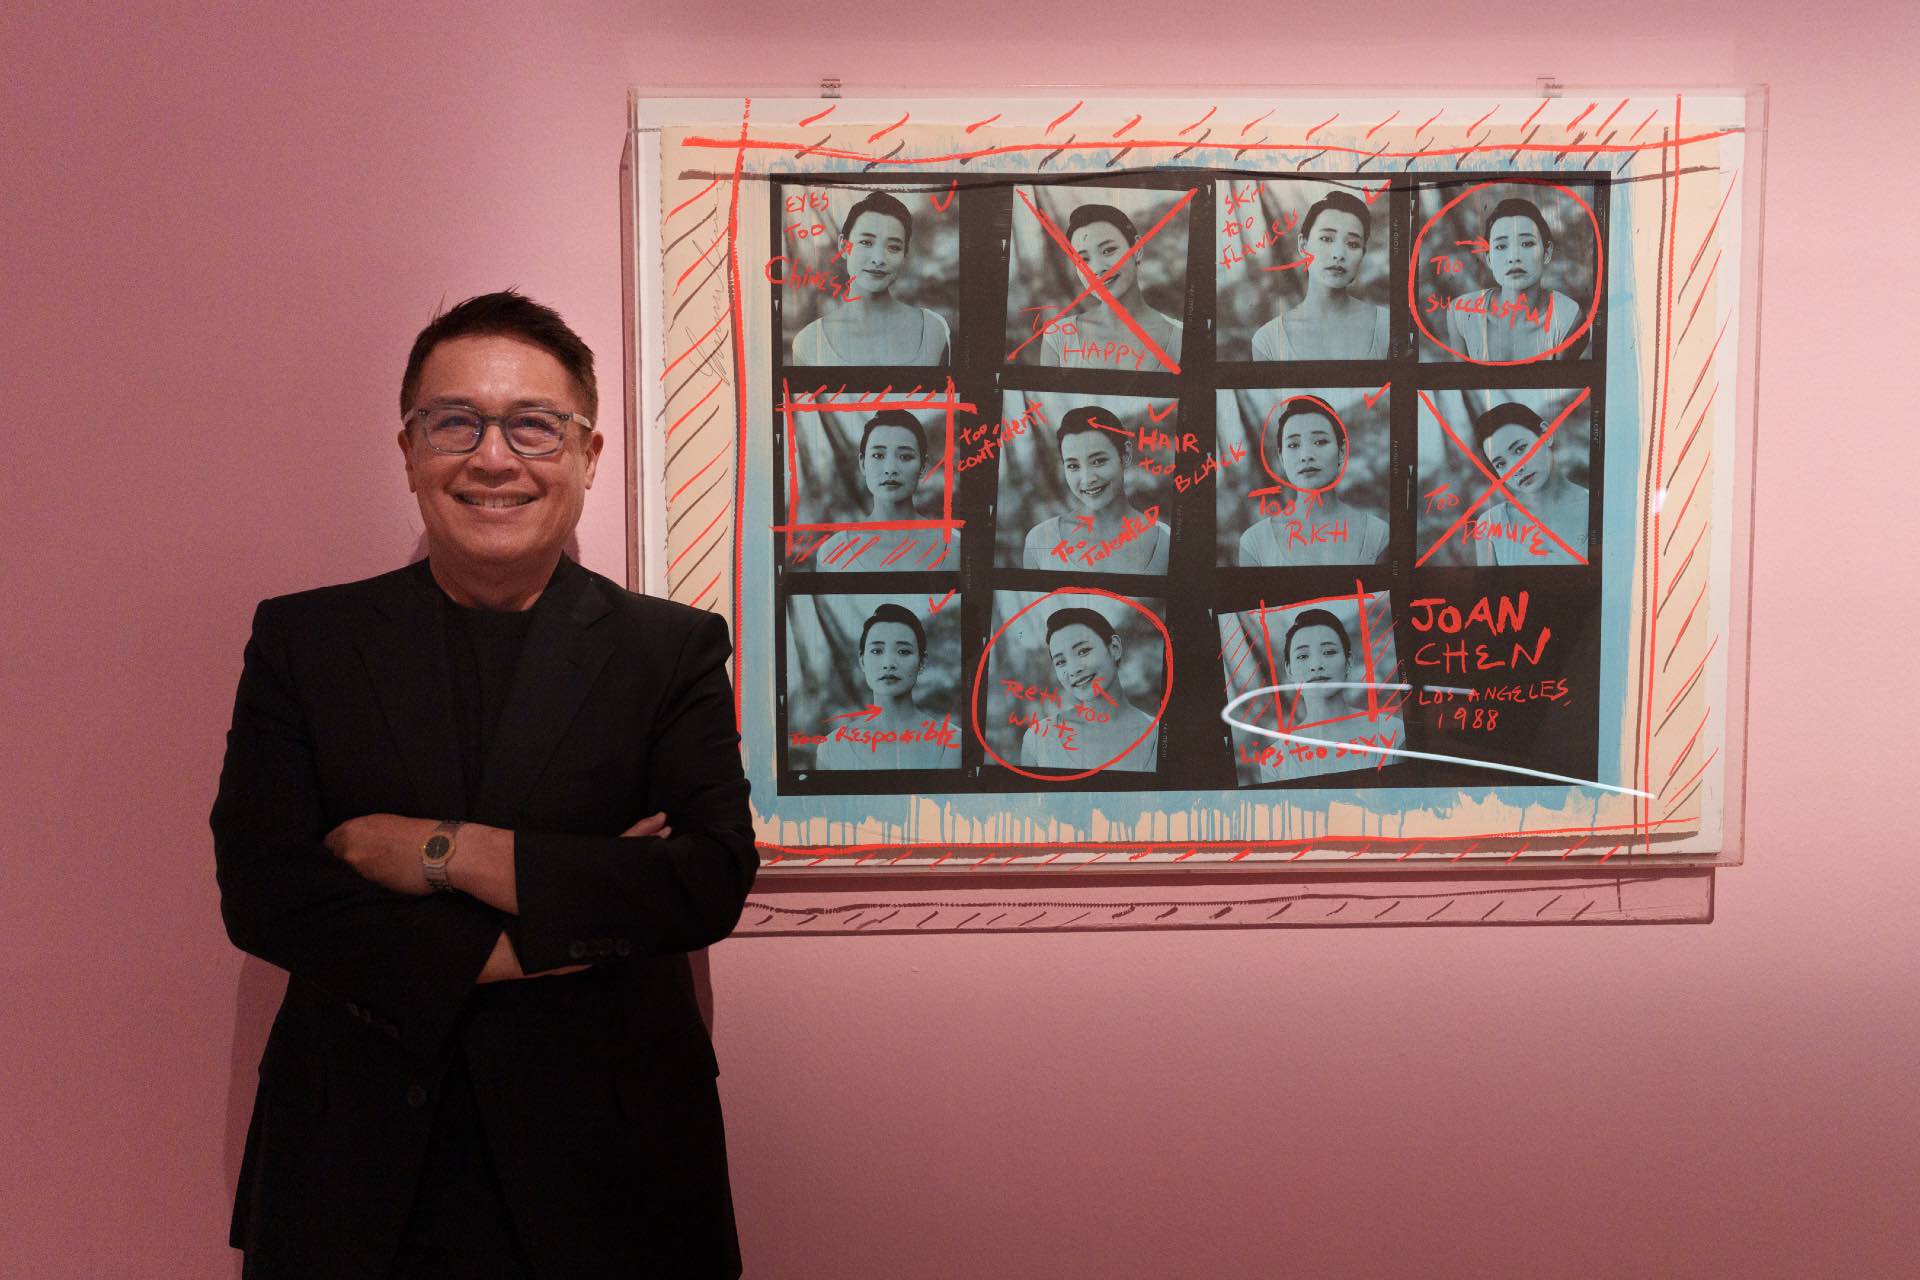 Celebrated Singaporean photographer Russel Wong next to his blue lithograph print of Chinese-American actress Joan Chen